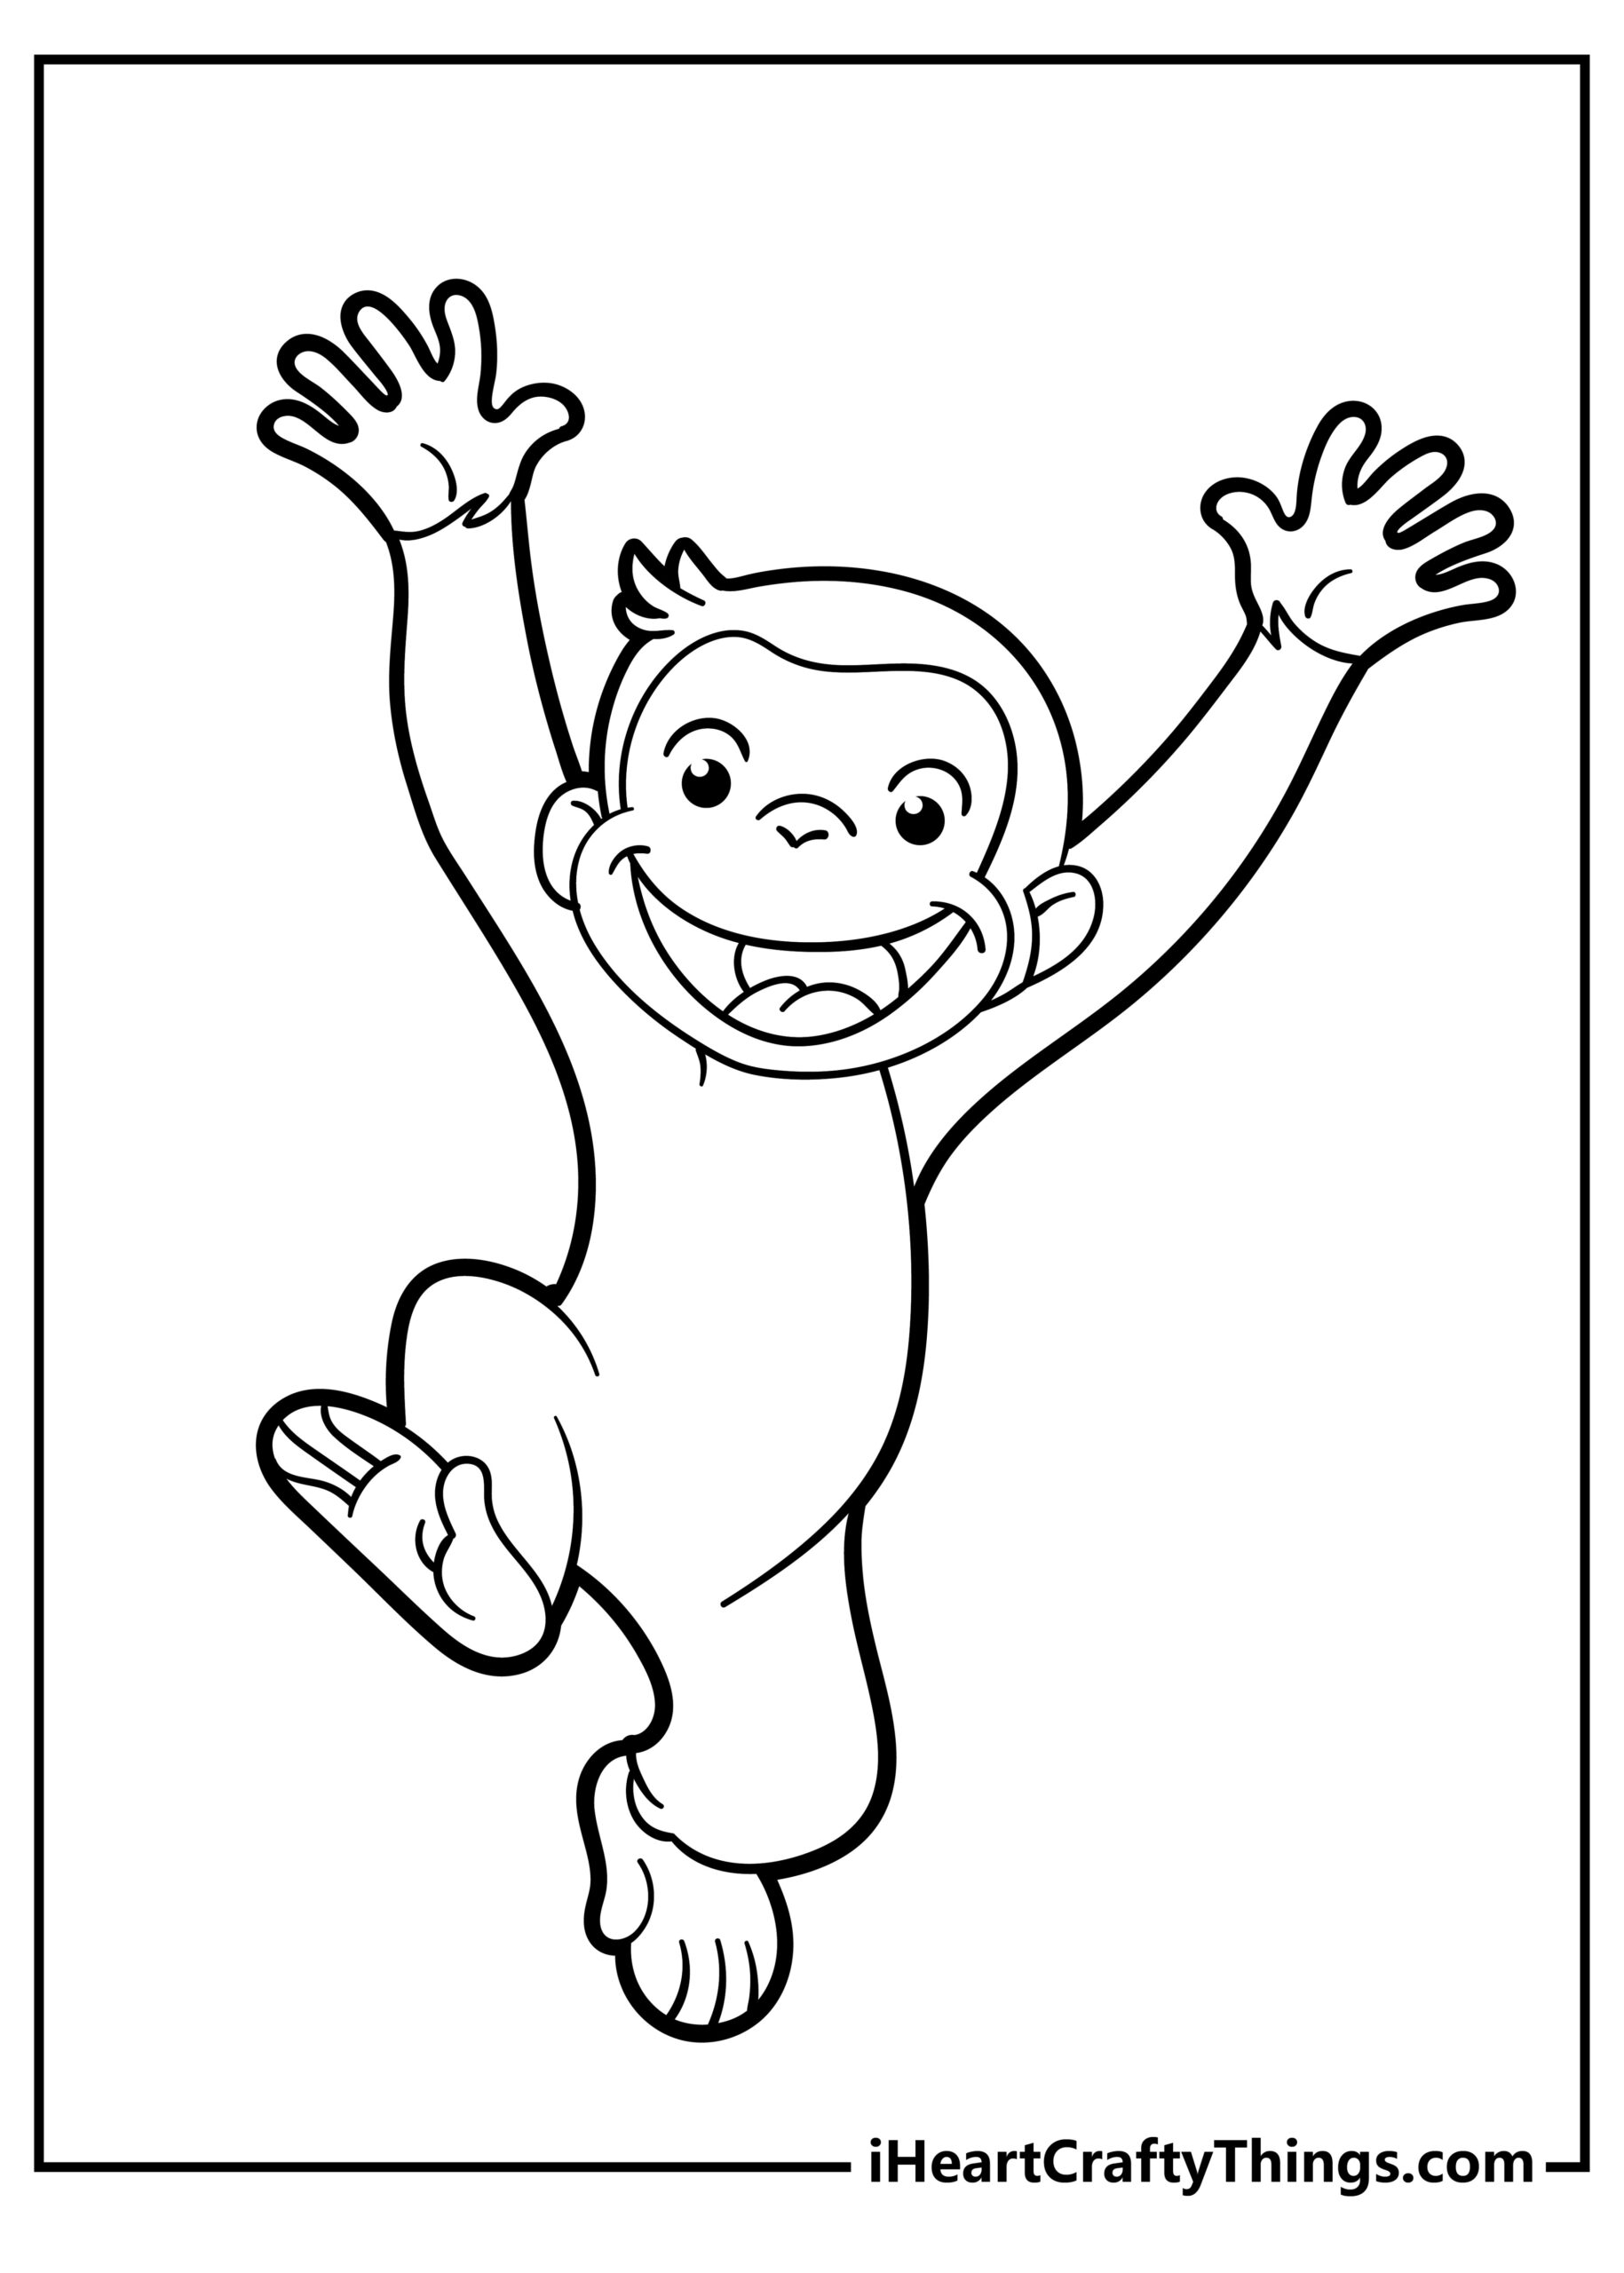 Printable Curious George Coloring Pages (Updated )